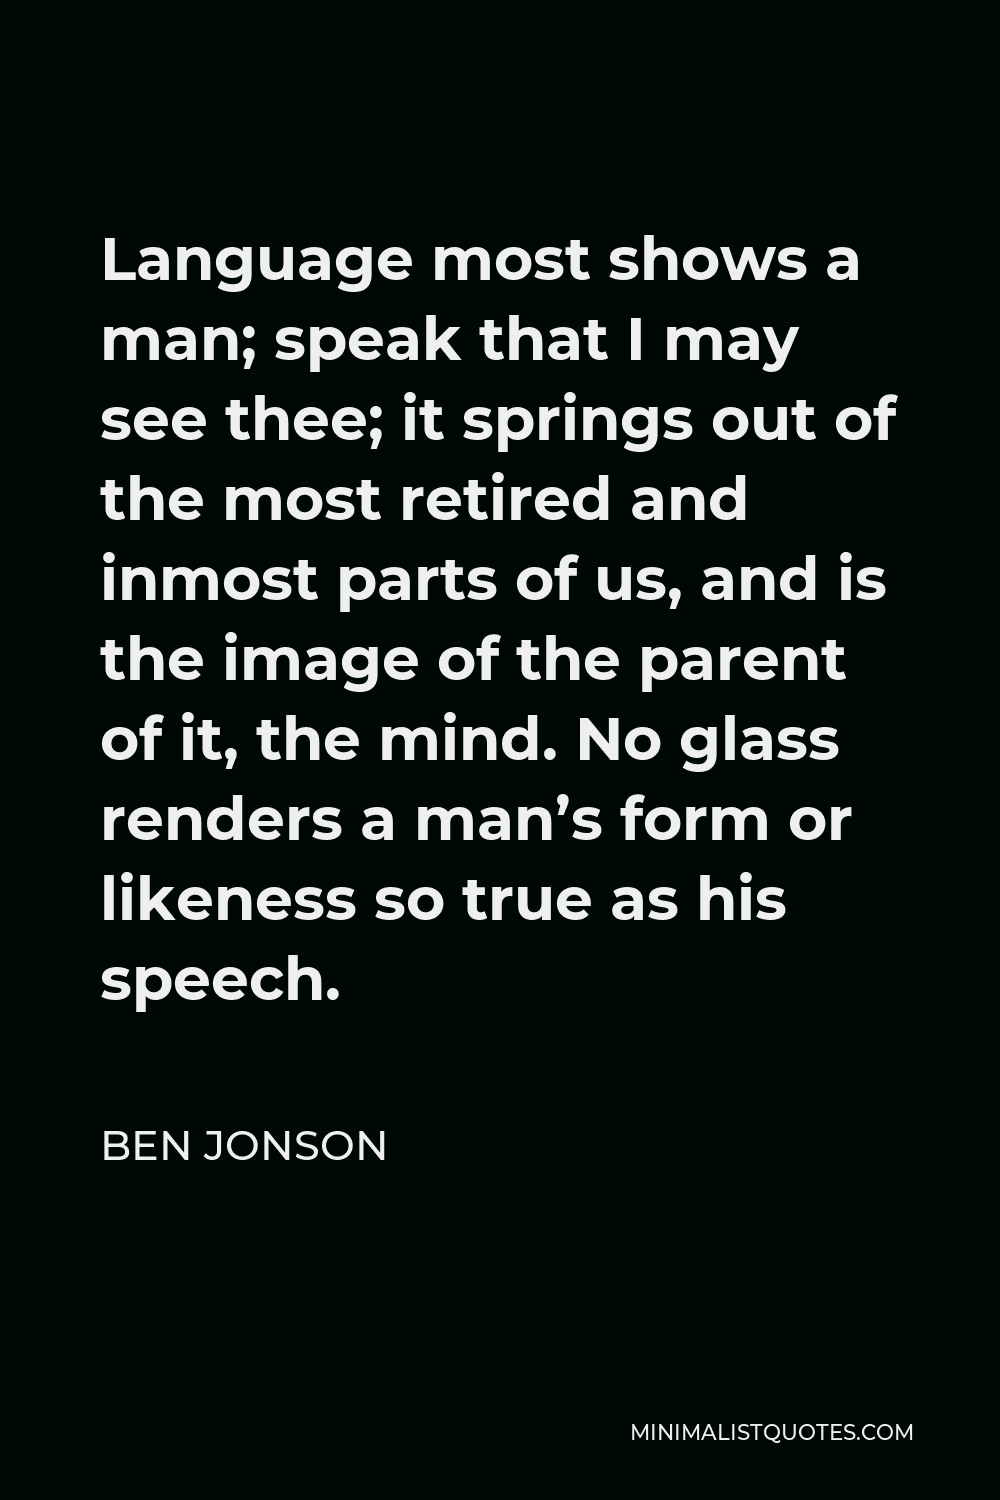 Ben Jonson Quote - Language most shows a man; speak that I may see thee; it springs out of the most retired and inmost parts of us, and is the image of the parent of it, the mind. No glass renders a man’s form or likeness so true as his speech.